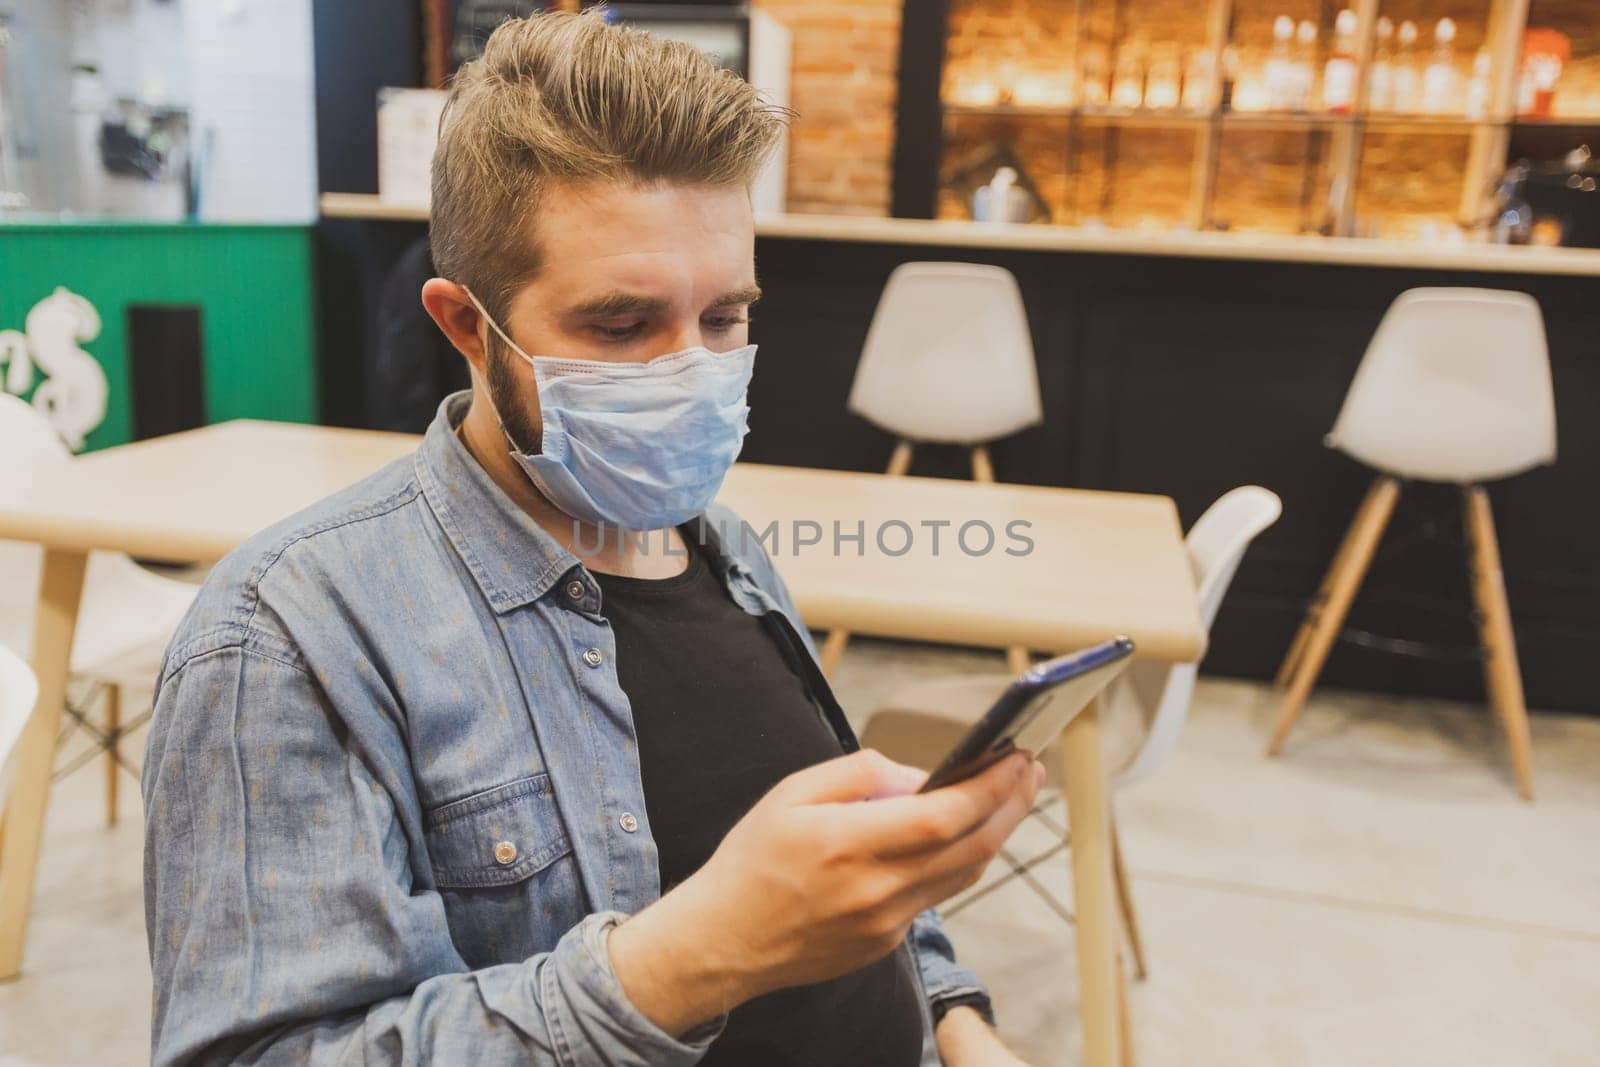 Man wears medical face mask in public area and using smartphone to do work business and social network communication in public cafe work space area